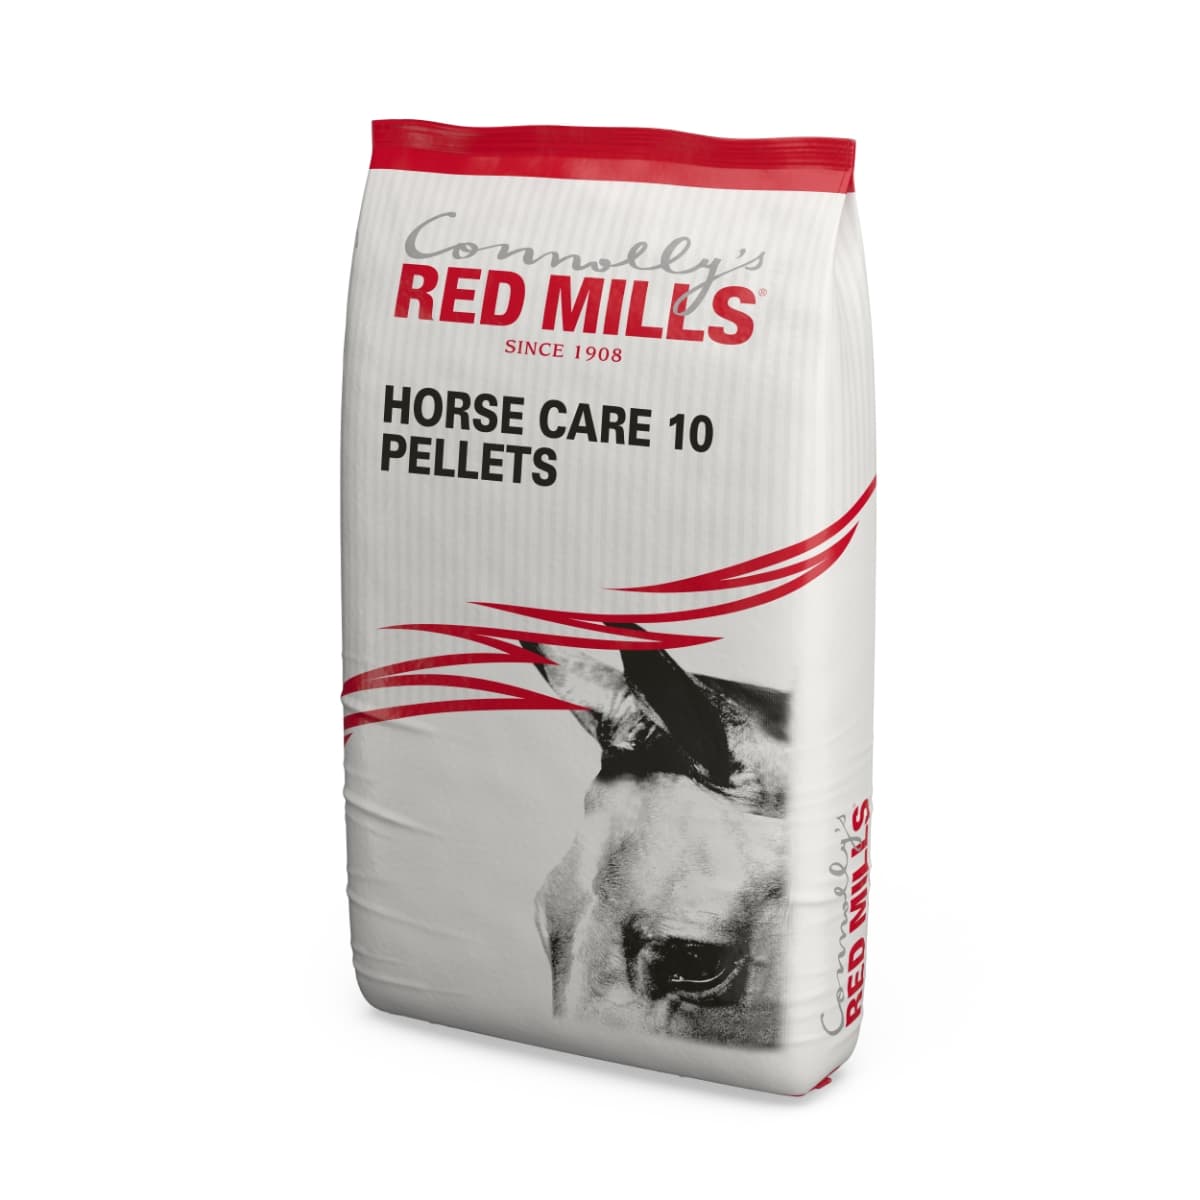 RED MILLS Horse Care 10 Pellets